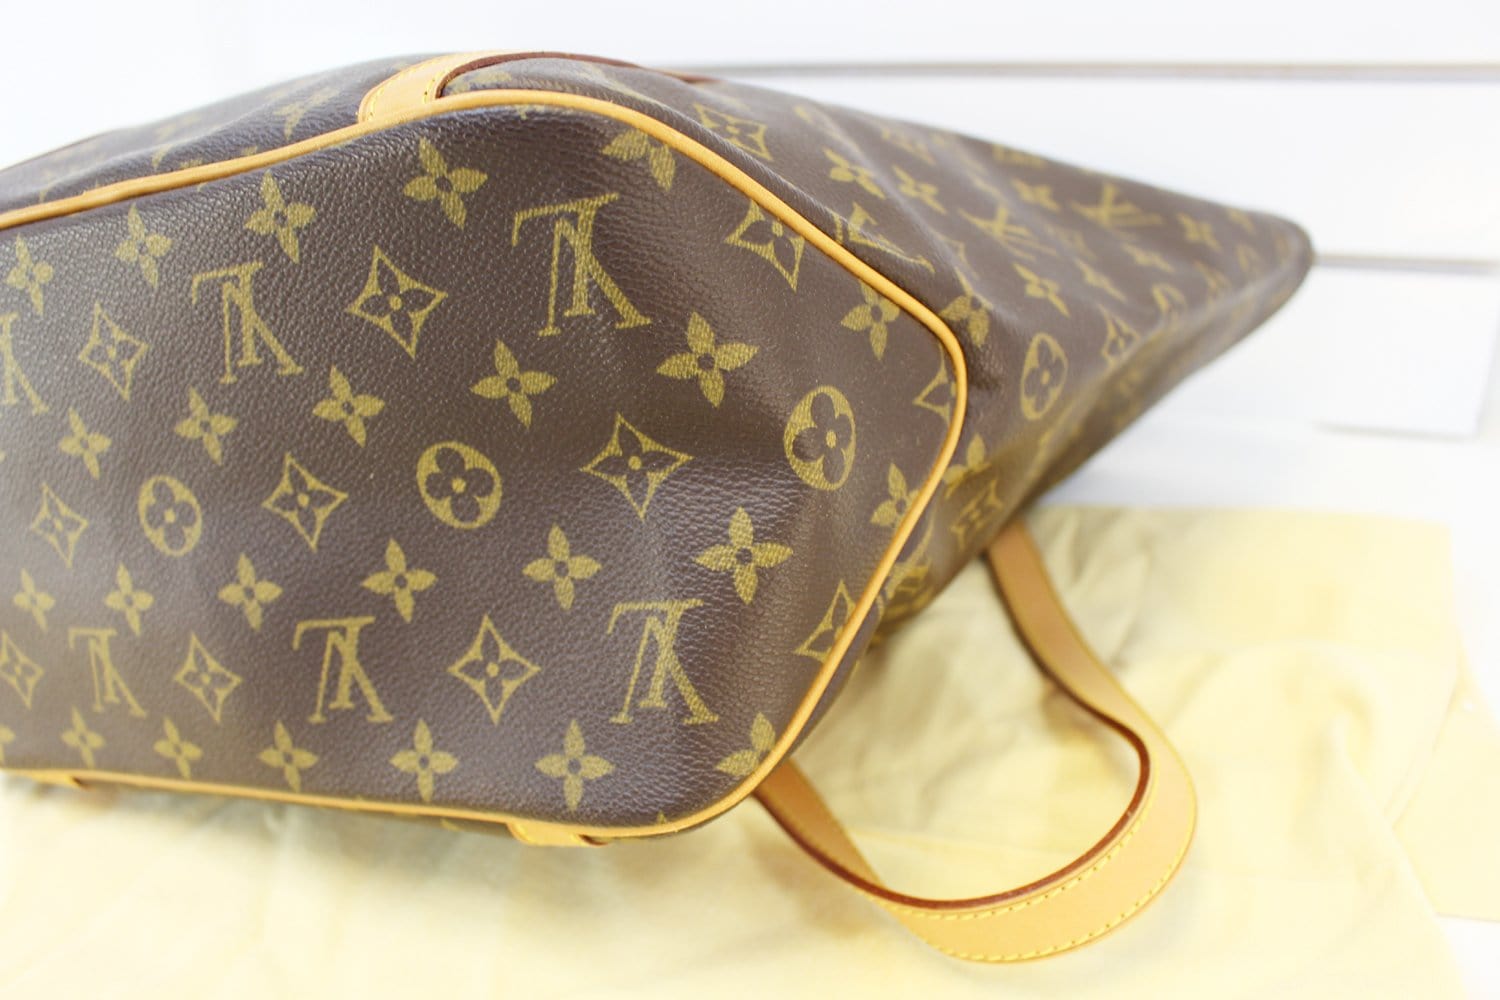 Louis Vuitton Monogram Sac Shopping Tote M51110 Authenticity Certified